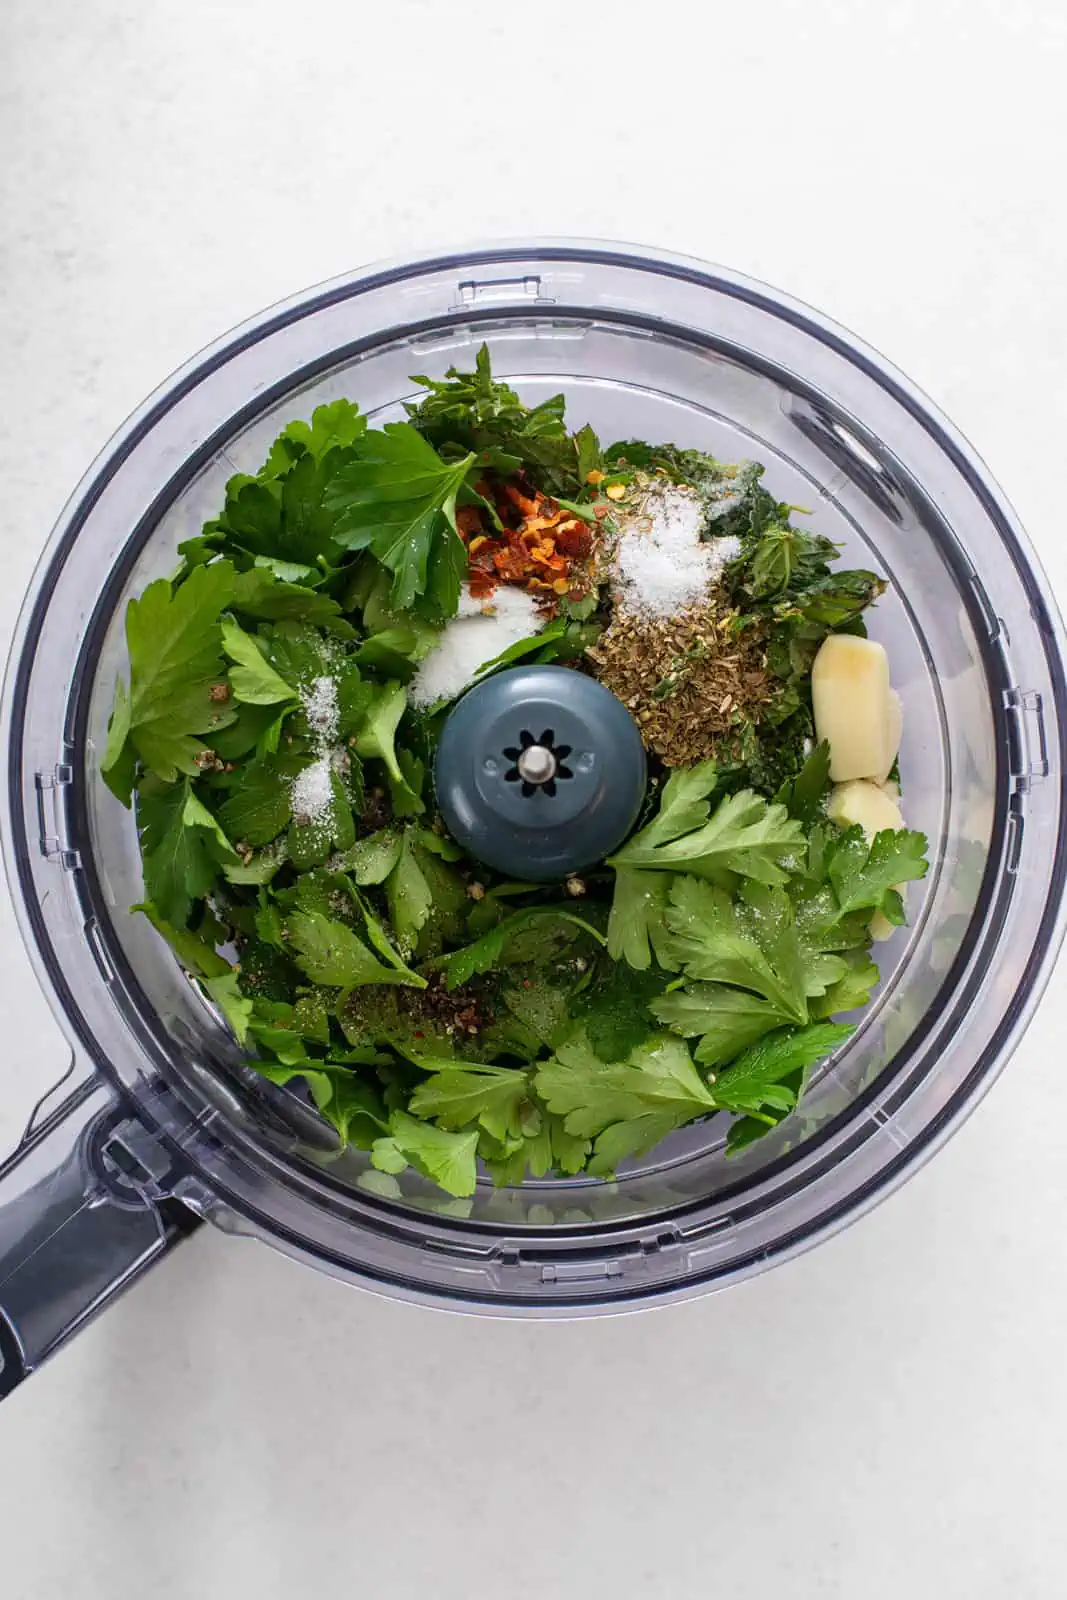 Ingredients for mint chimichurri in the bowl of a food processor.